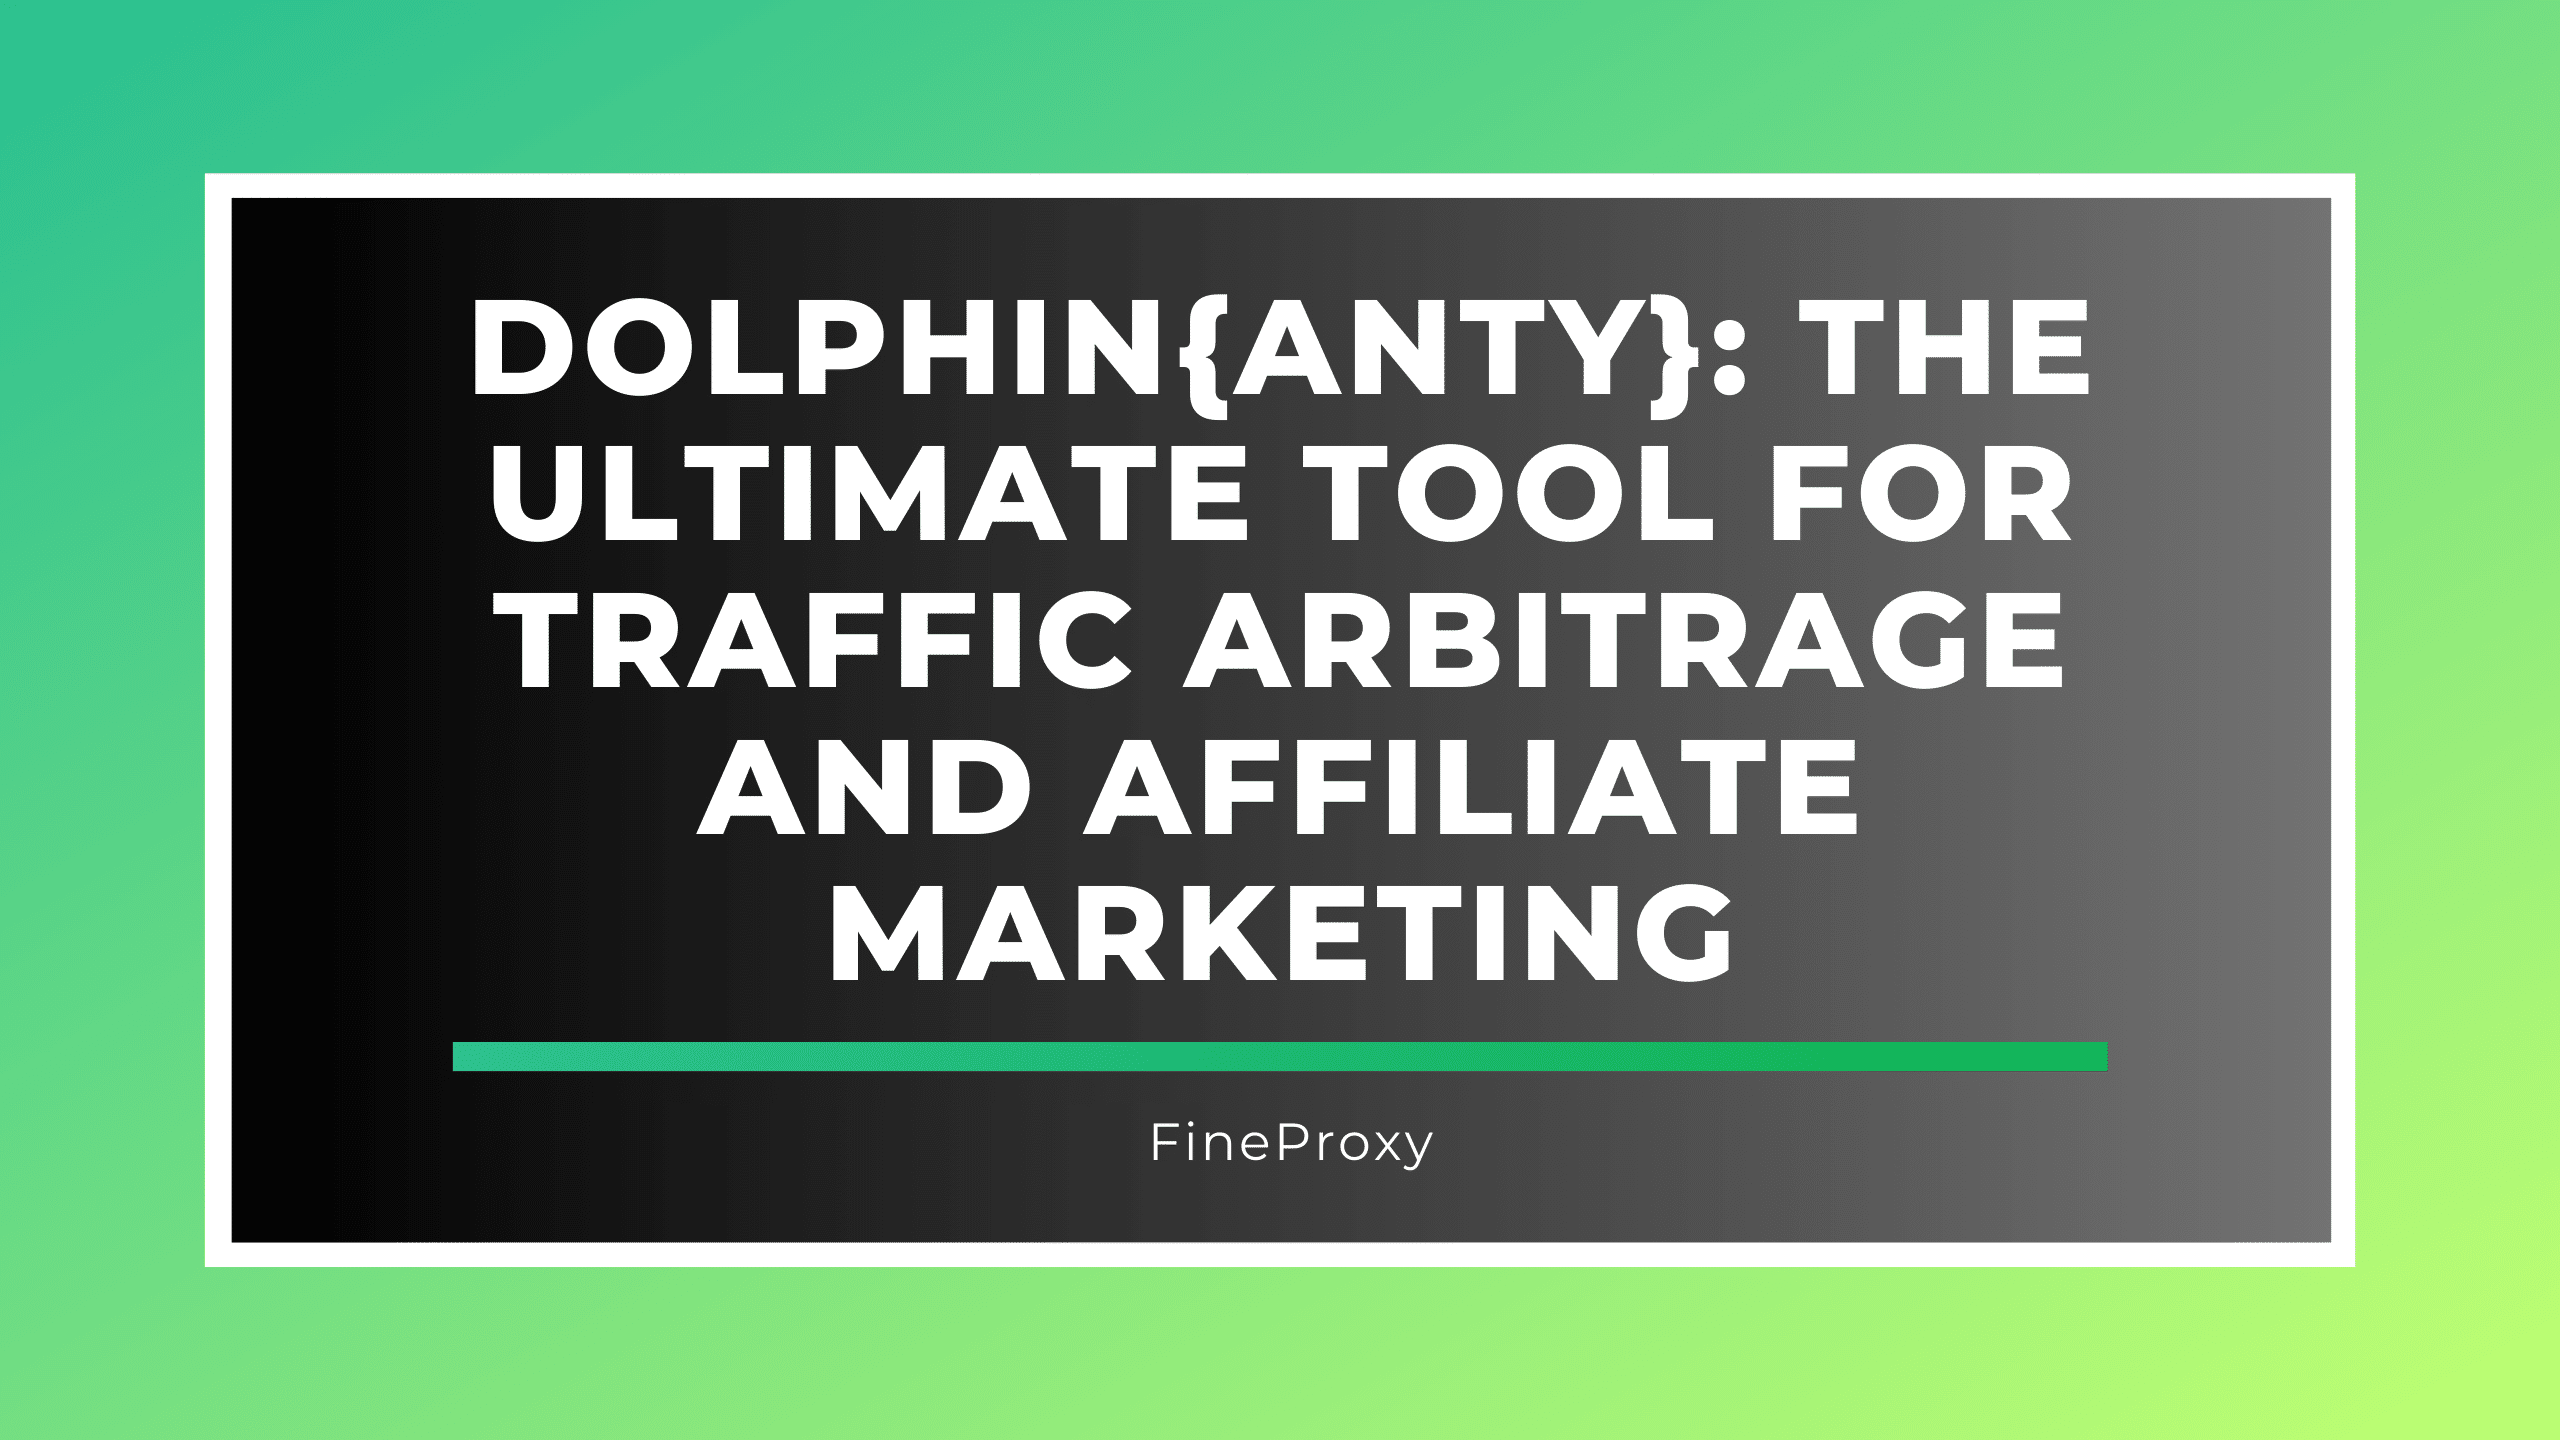 Dolphin{Anty}: The Ultimate Tool for Traffic Arbitrage and Affiliate Marketing